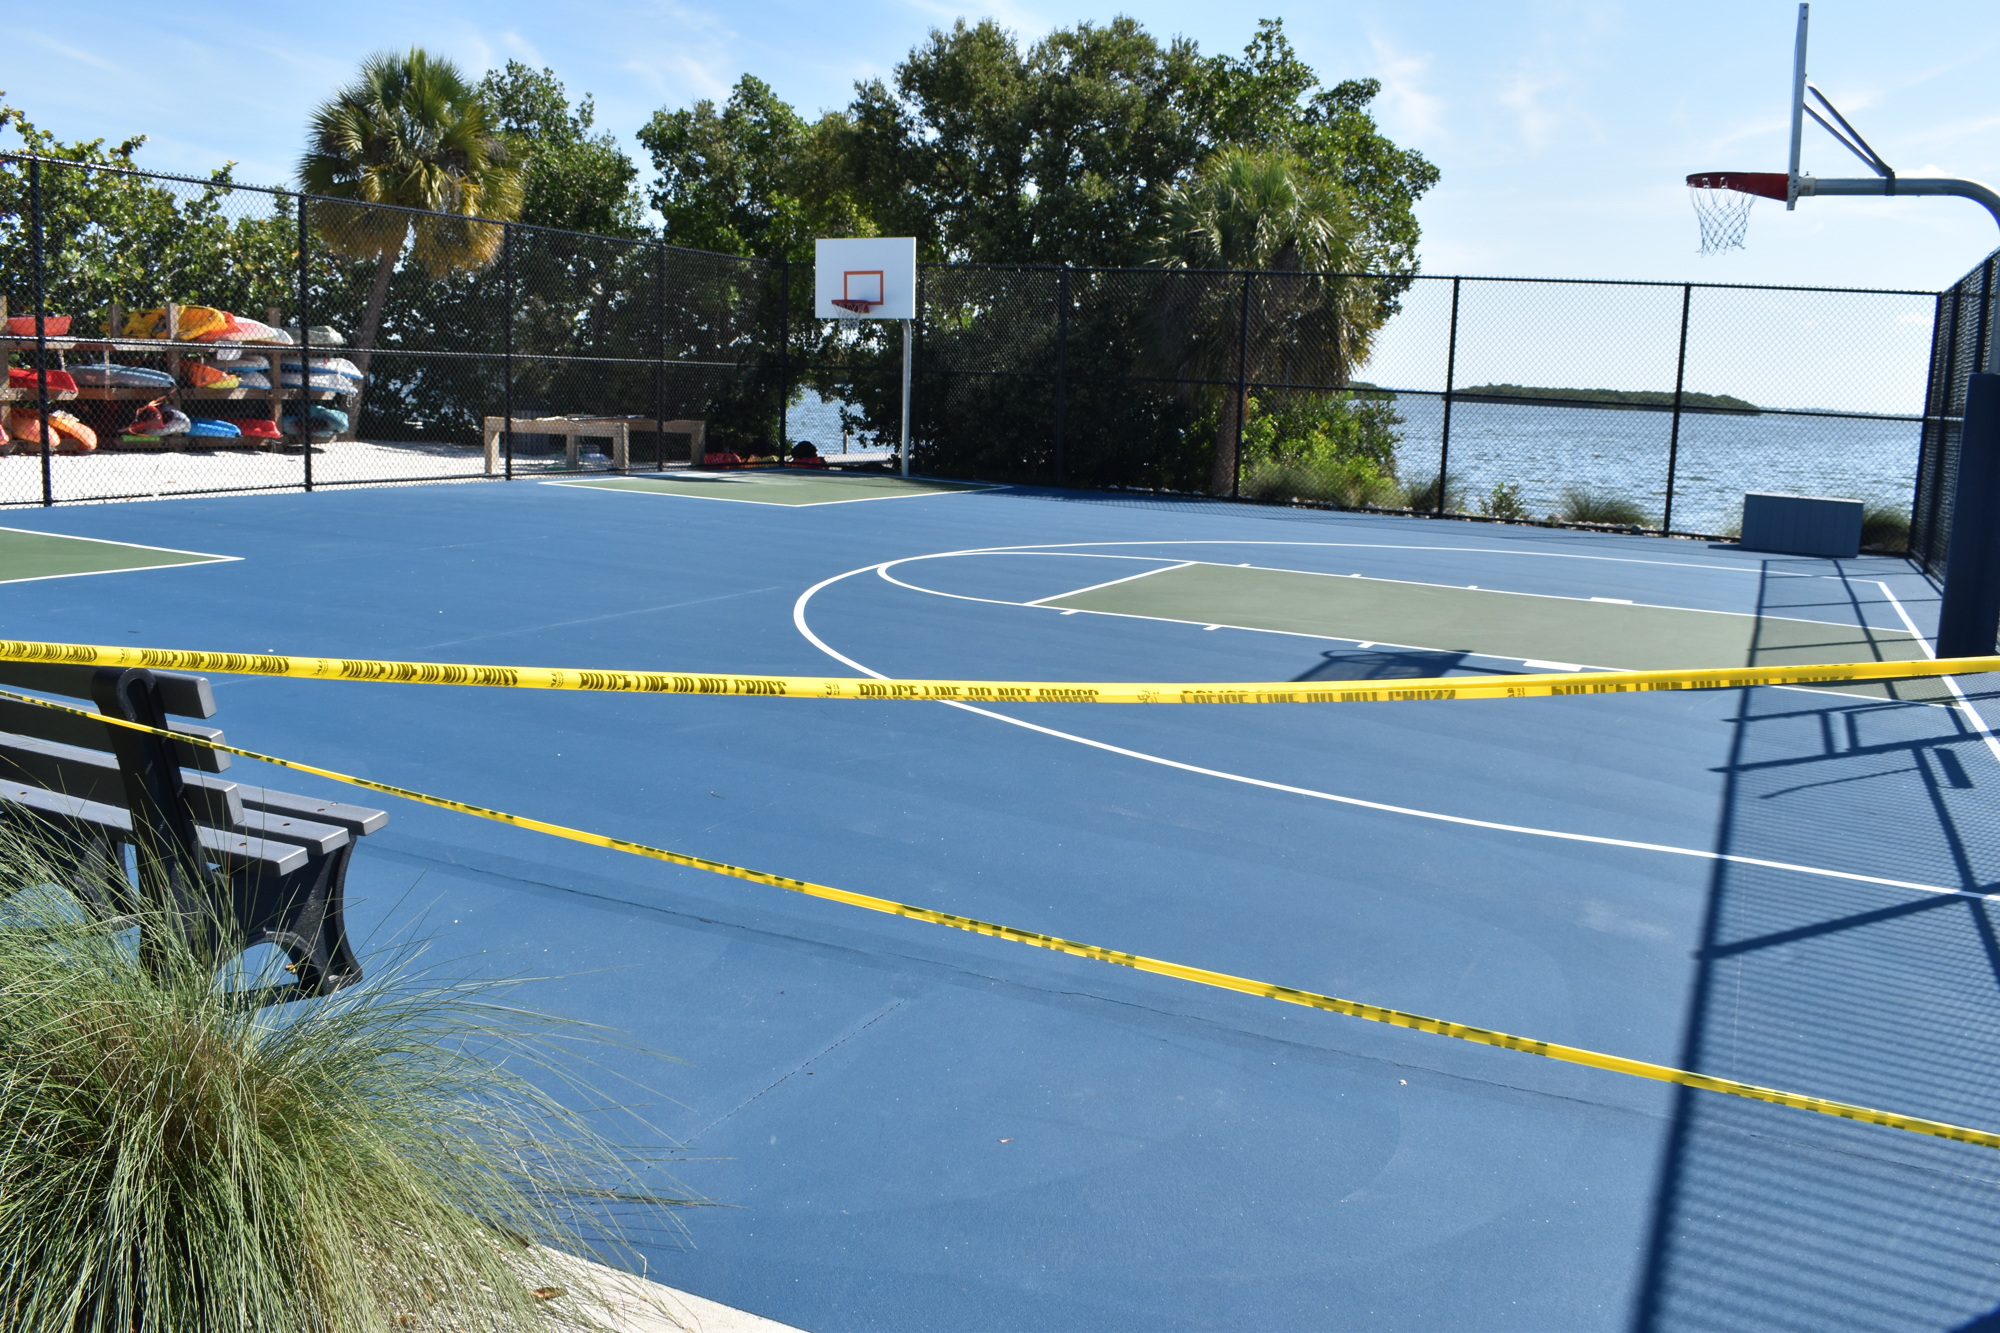 The recreational facilities at Bayfront Park have been closed since March 22.